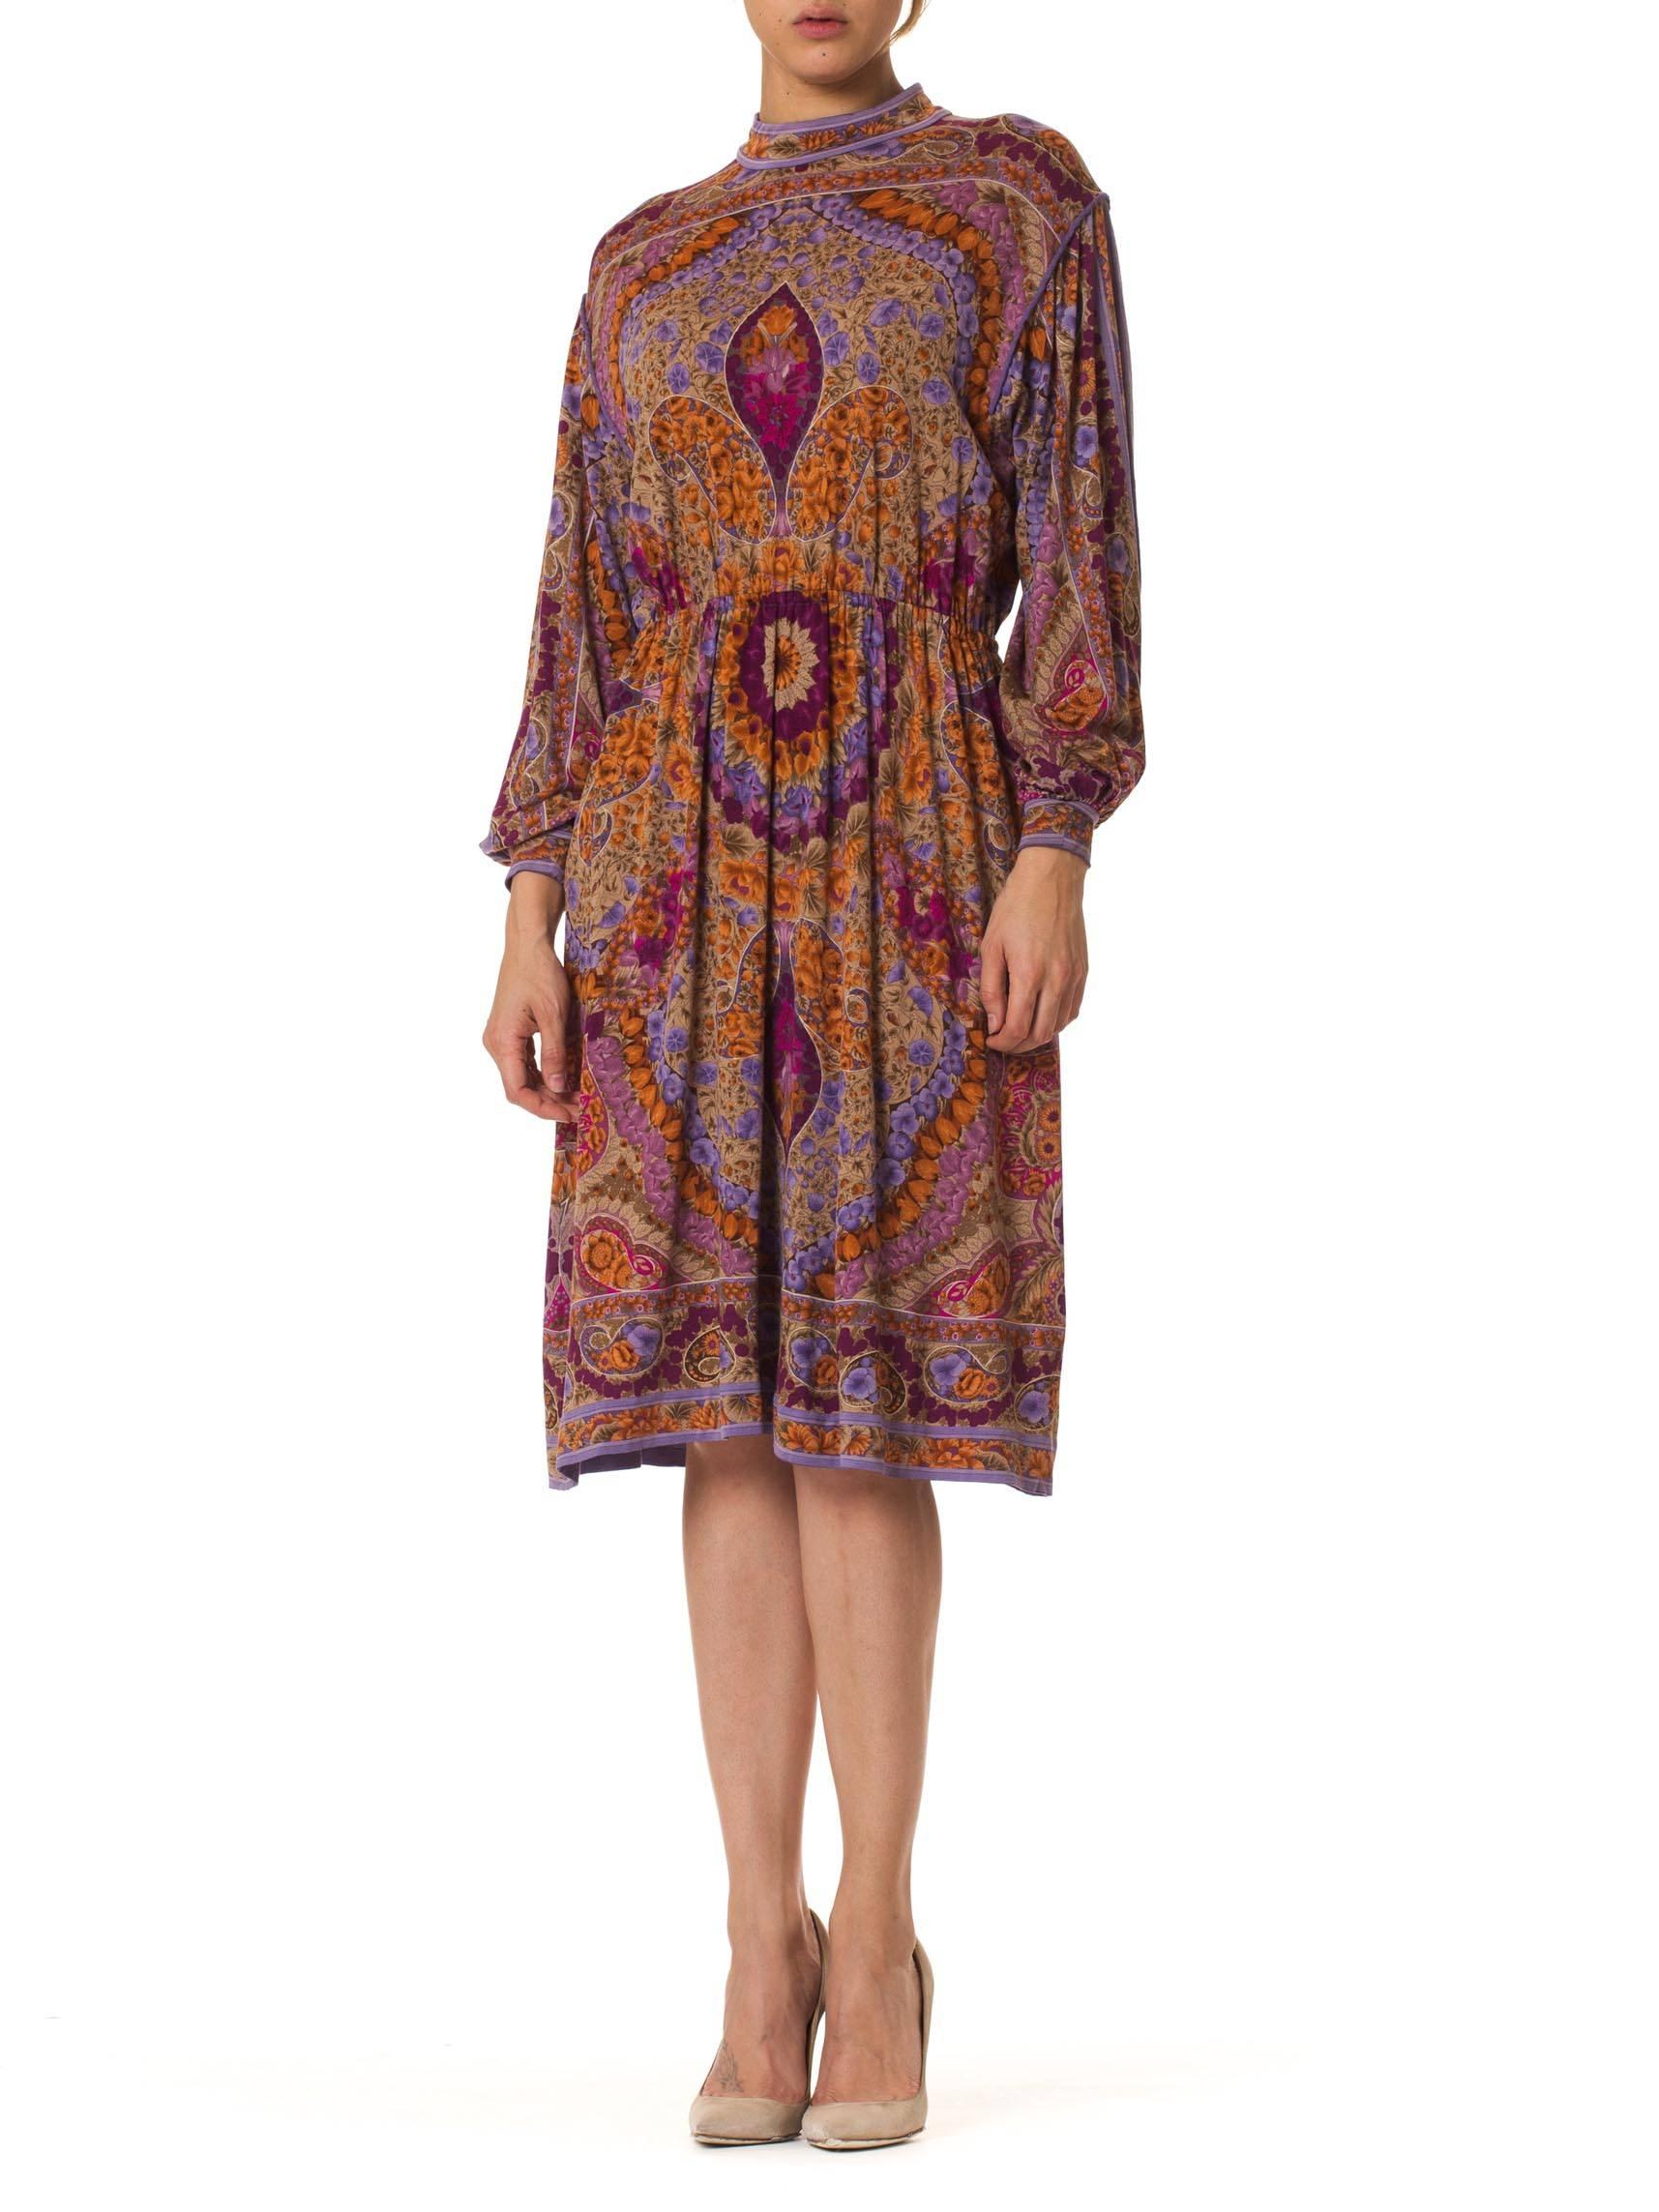 This is a wonderful paisley and floral dress in playful hues of orange and violet. The exuberant pattern is arranged thoughtfully and symetrically on the dress, with large motifs accenting the lines of the body underneath. By this means, the